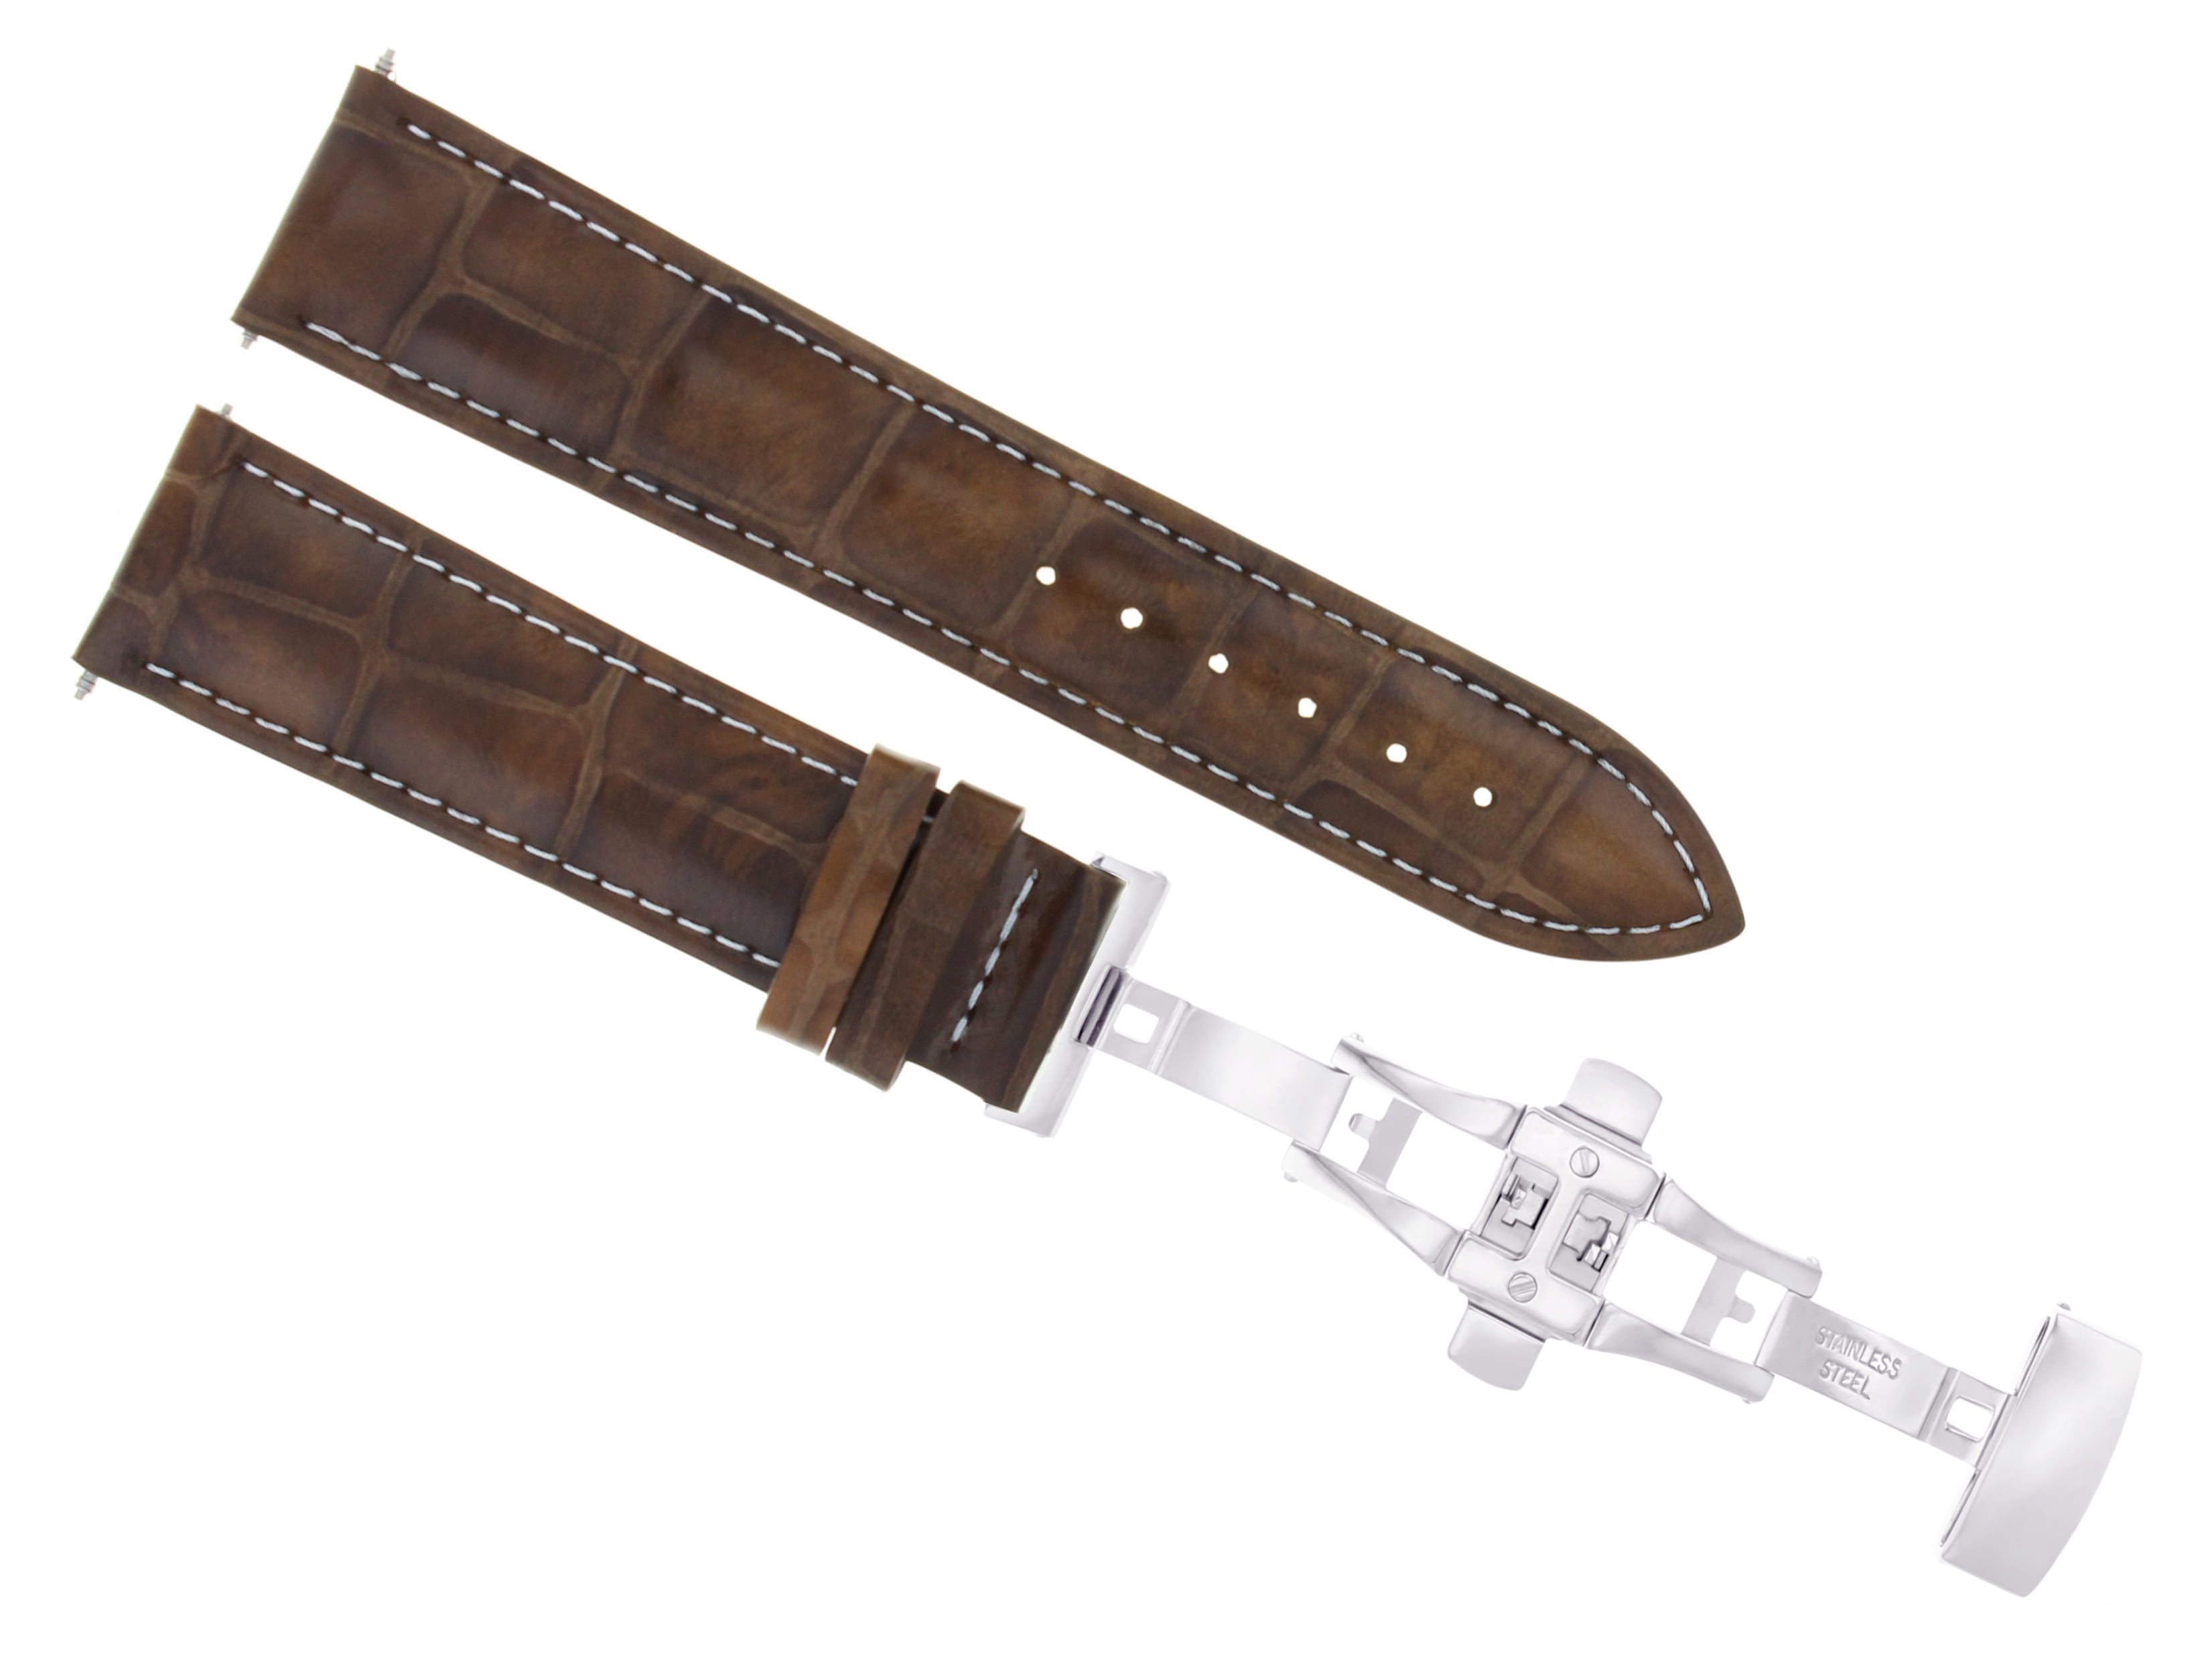 19MM LEATHER WATCH STRAP BAND FOR SEIKO SNE039 WATCH DEPLOYMENT CLASP  L/BROWN WS 